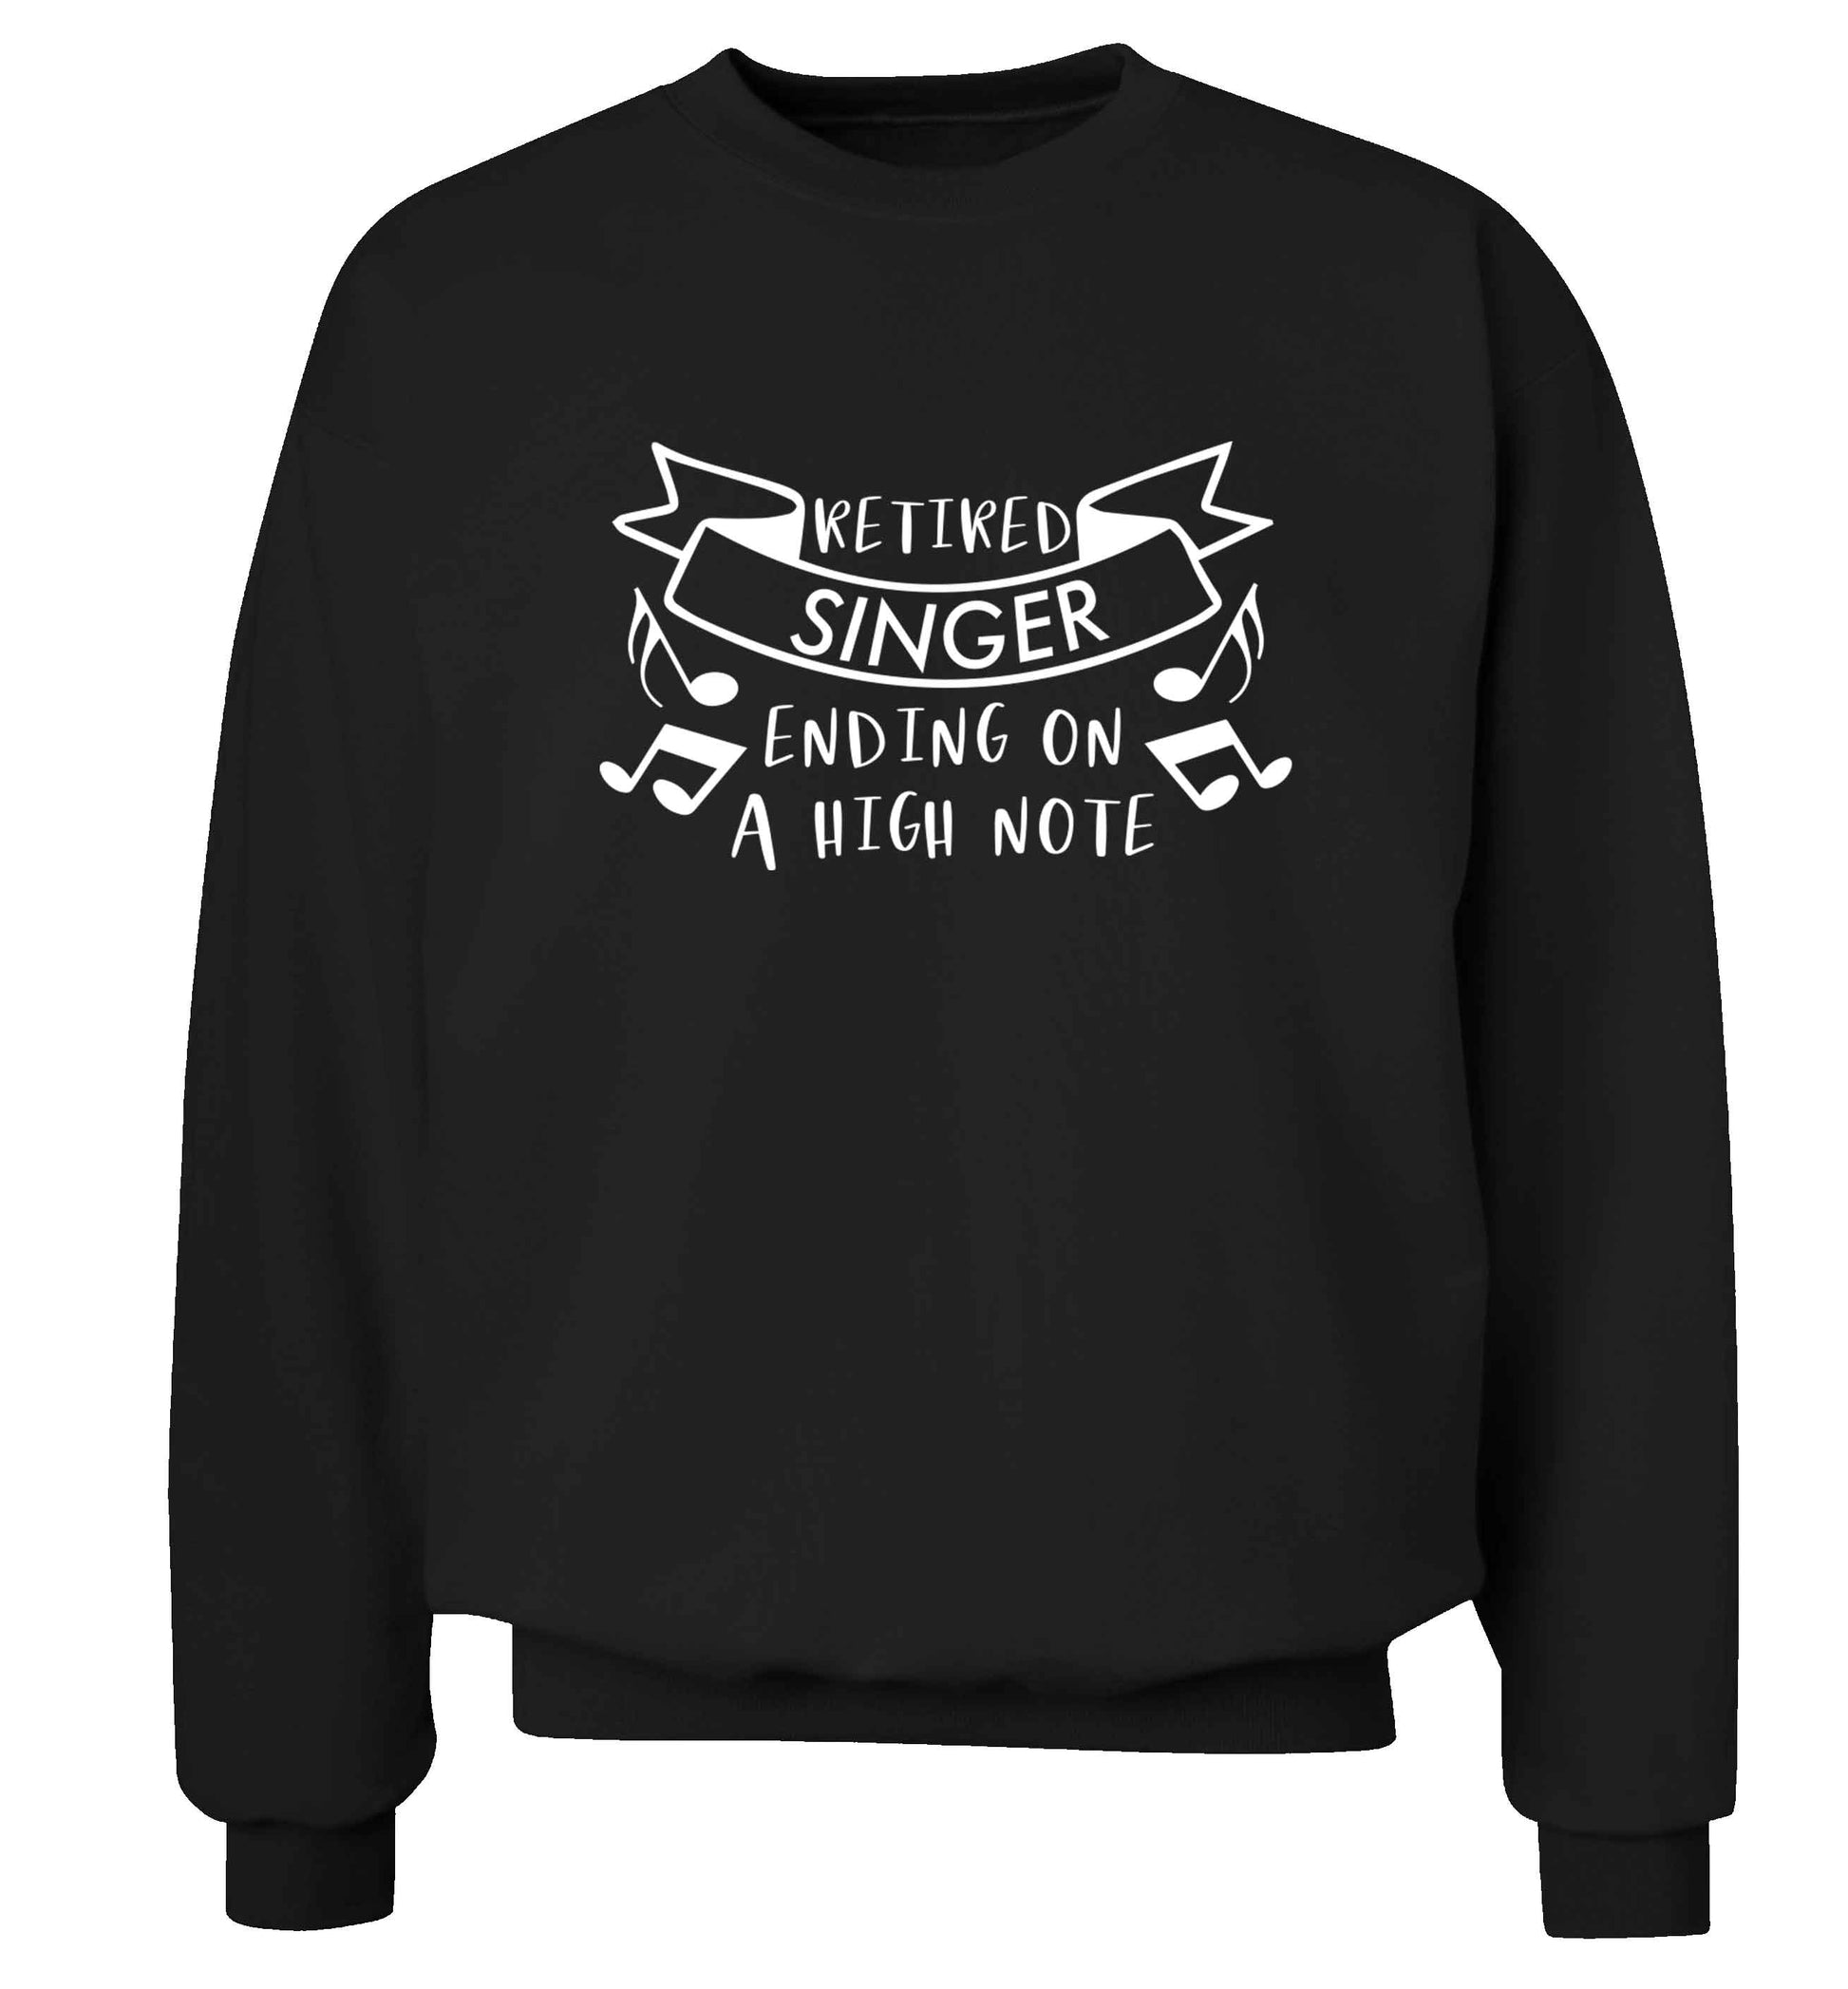 Retired singer ending on a high note Adult's unisex black Sweater 2XL